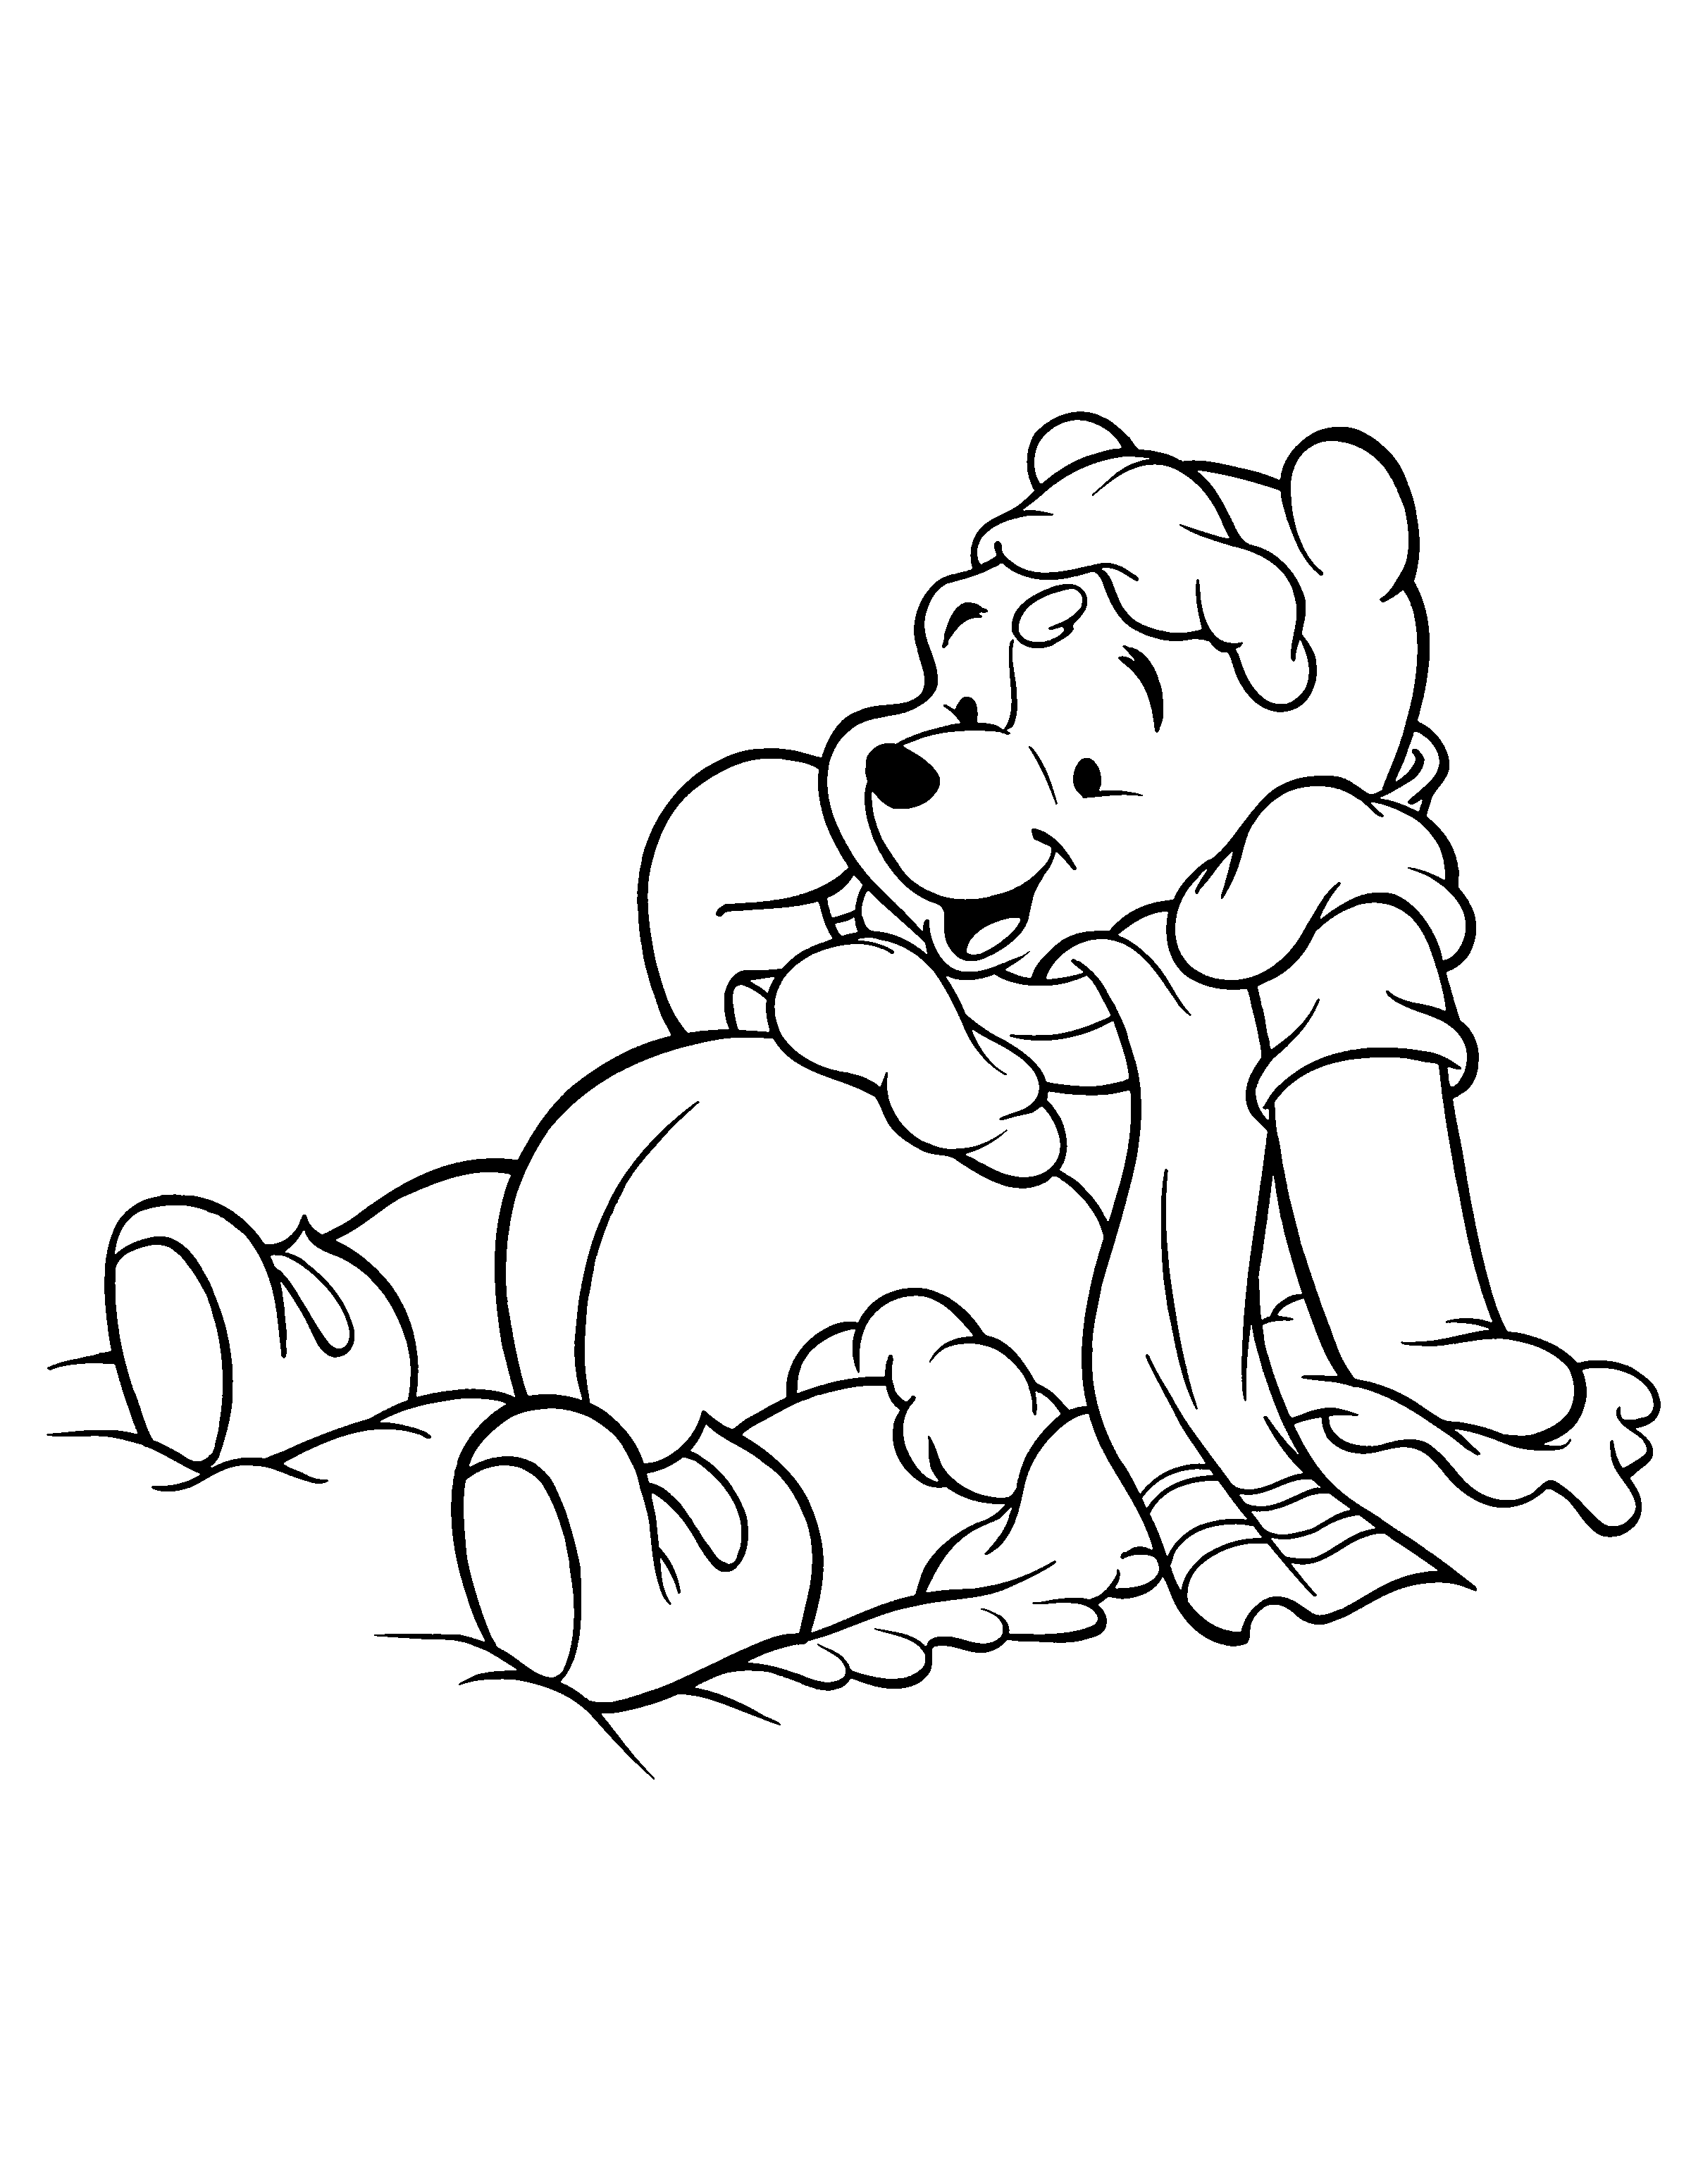 animated-coloring-pages-winnie-the-pooh-image-0010